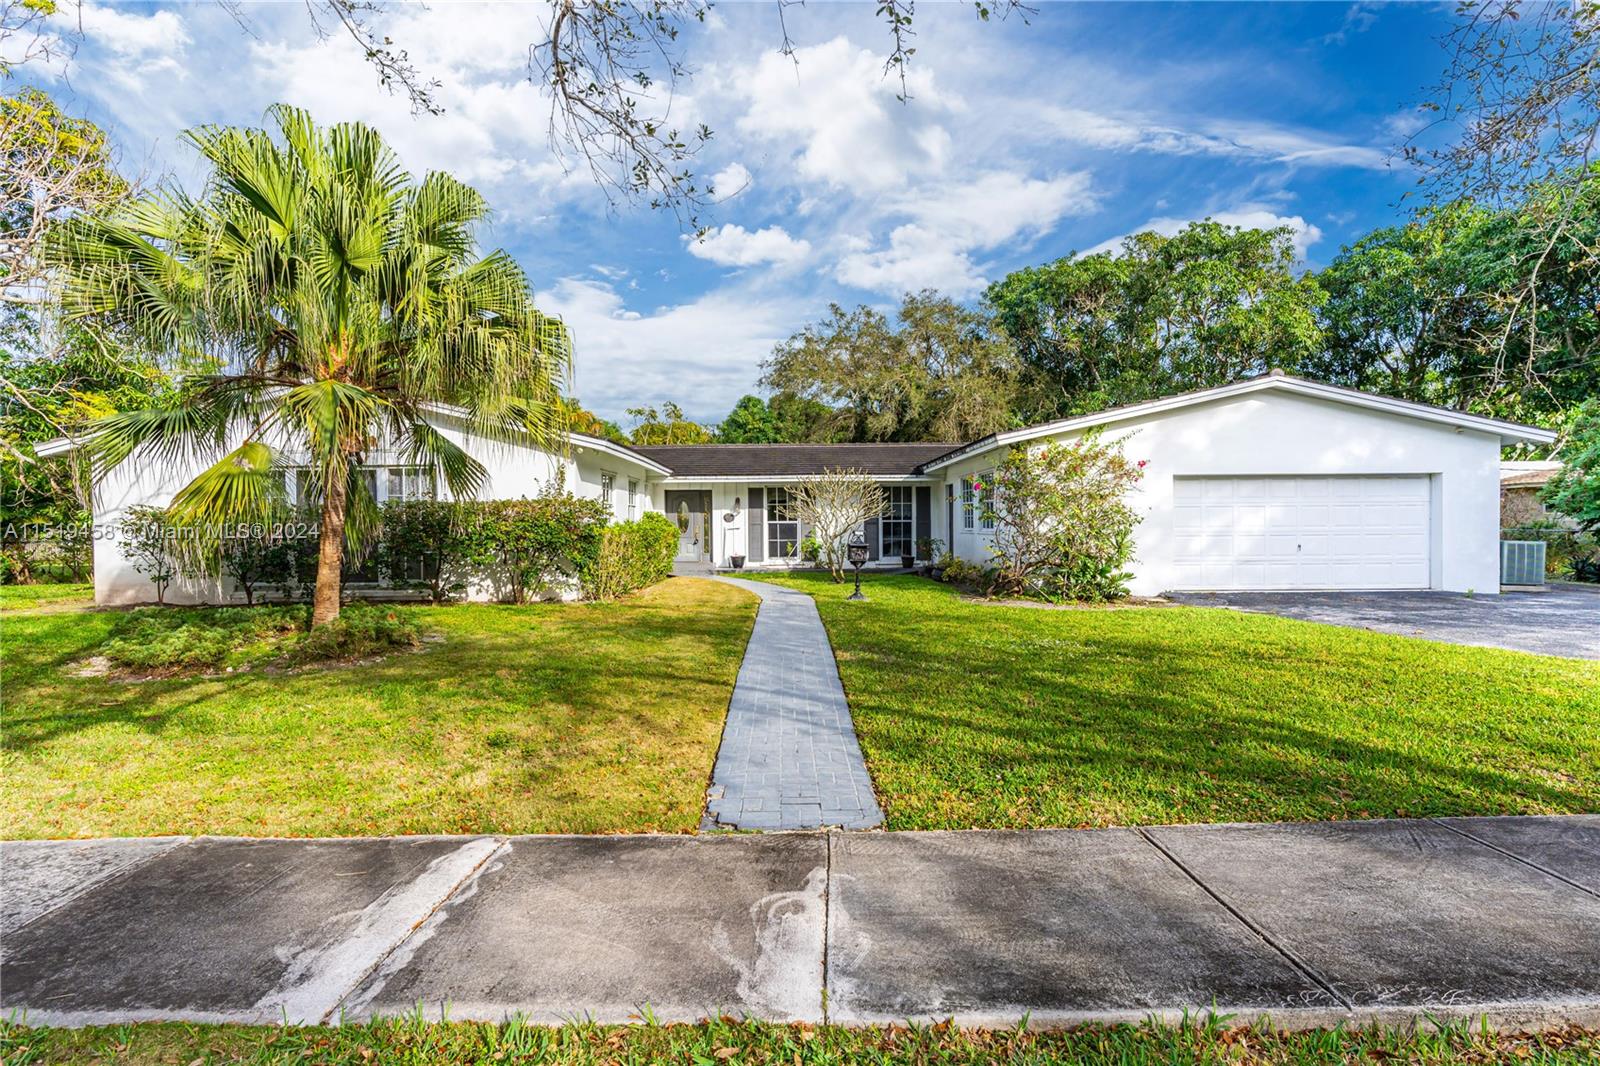 15101 SW 87th Ave, Palmetto Bay, Florida 33176, 6 Bedrooms Bedrooms, ,4 BathroomsBathrooms,Residential,For Sale,15101 SW 87th Ave,A11519458